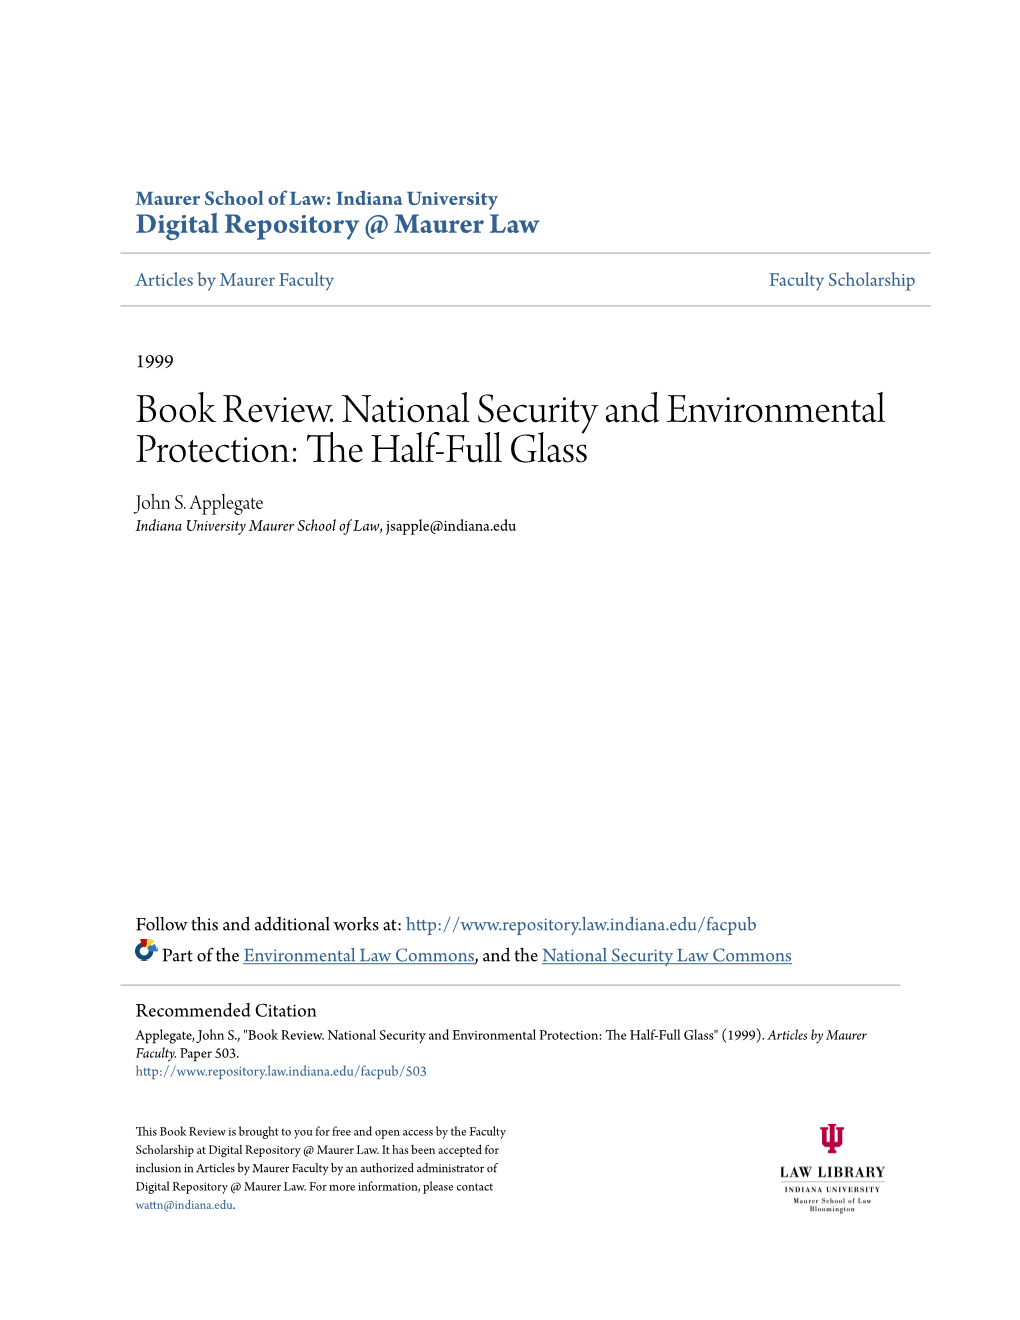 Book Review. National Security and Environmental Protection: the Alh F-Full Glass John S